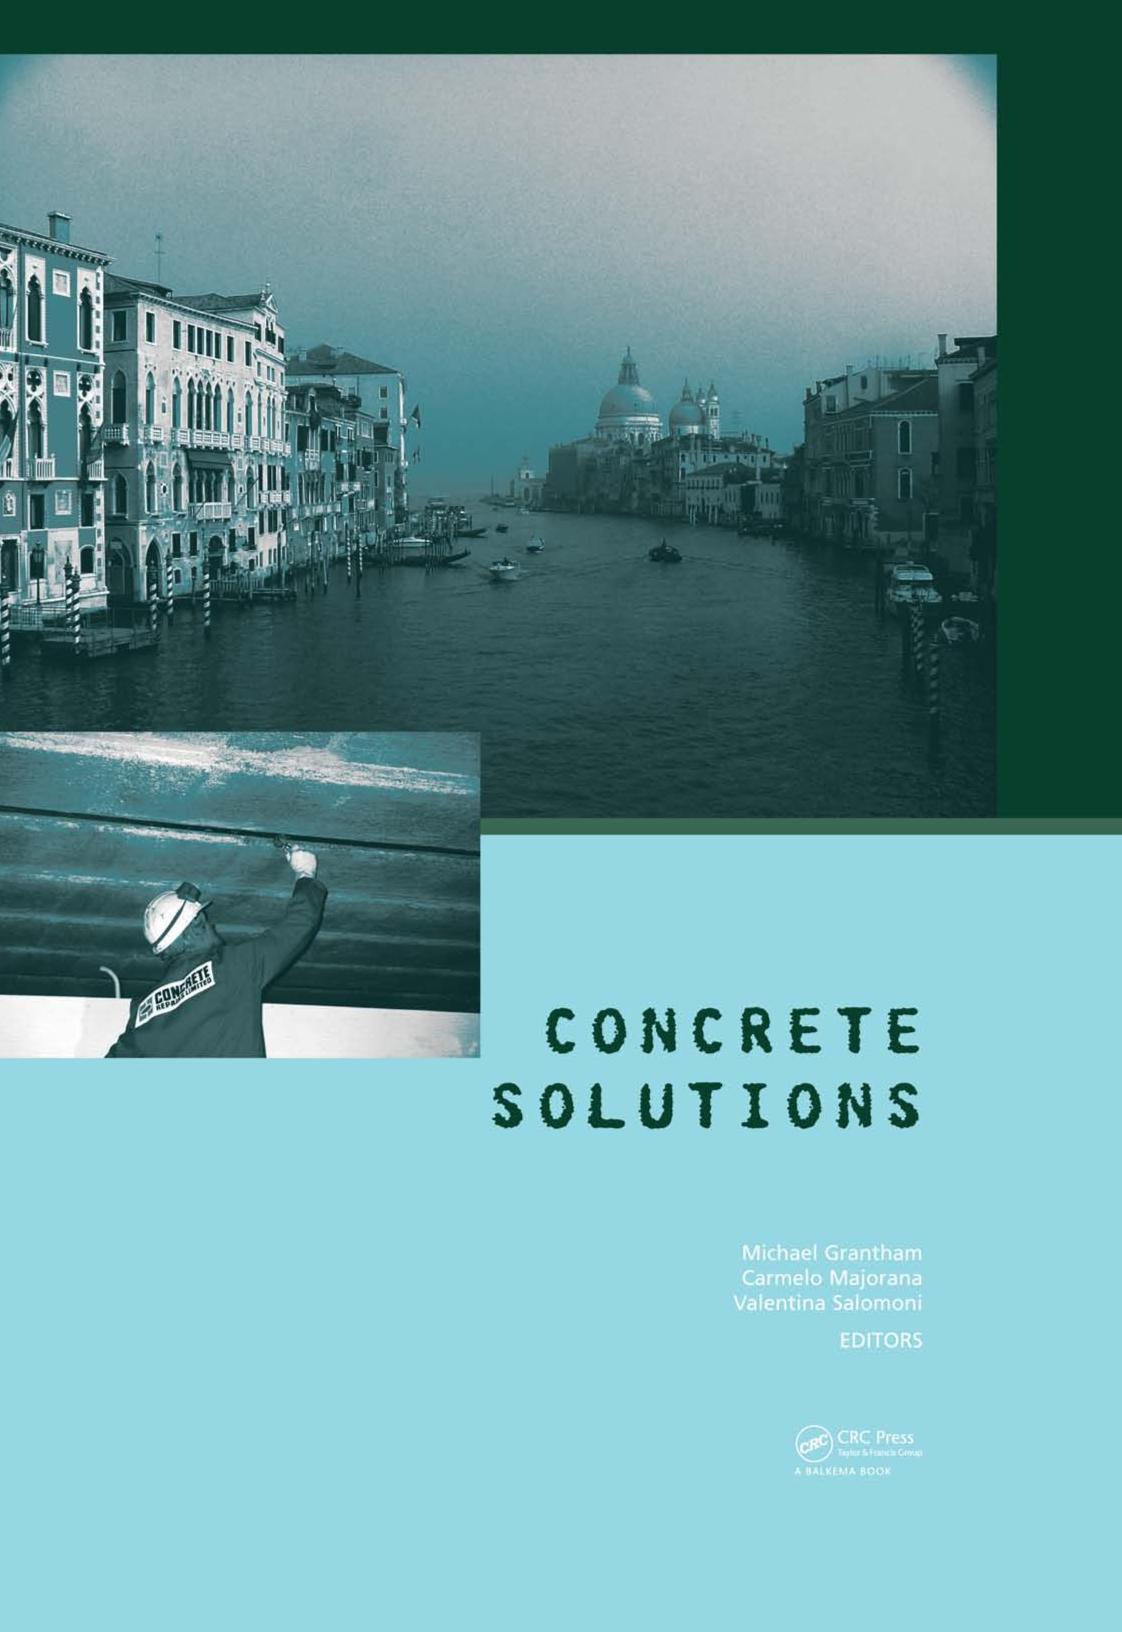 Concrete solutions : proceedings of the International Conference on Concrete Solutions, Padua, Italy, 22-25 June 2009